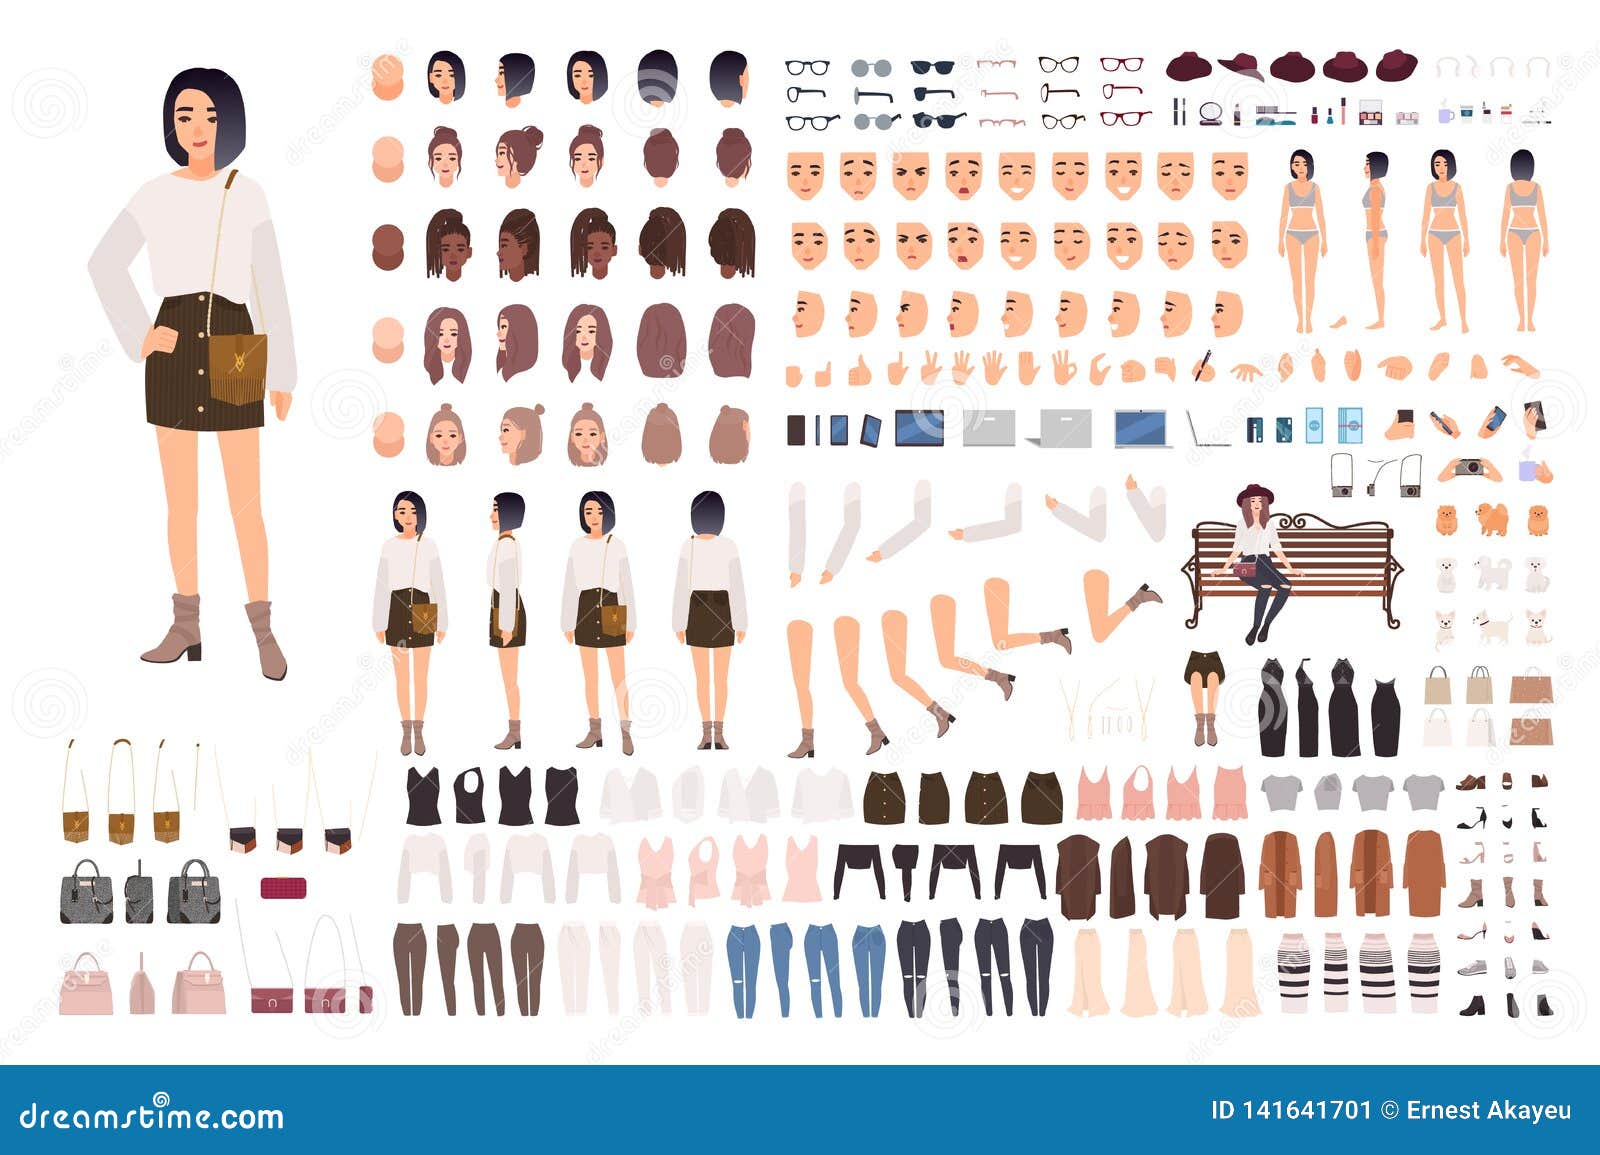 stylish young woman creation set or animation kit. bundle of body parts, trendy clothes, hairstyles, facial expressions